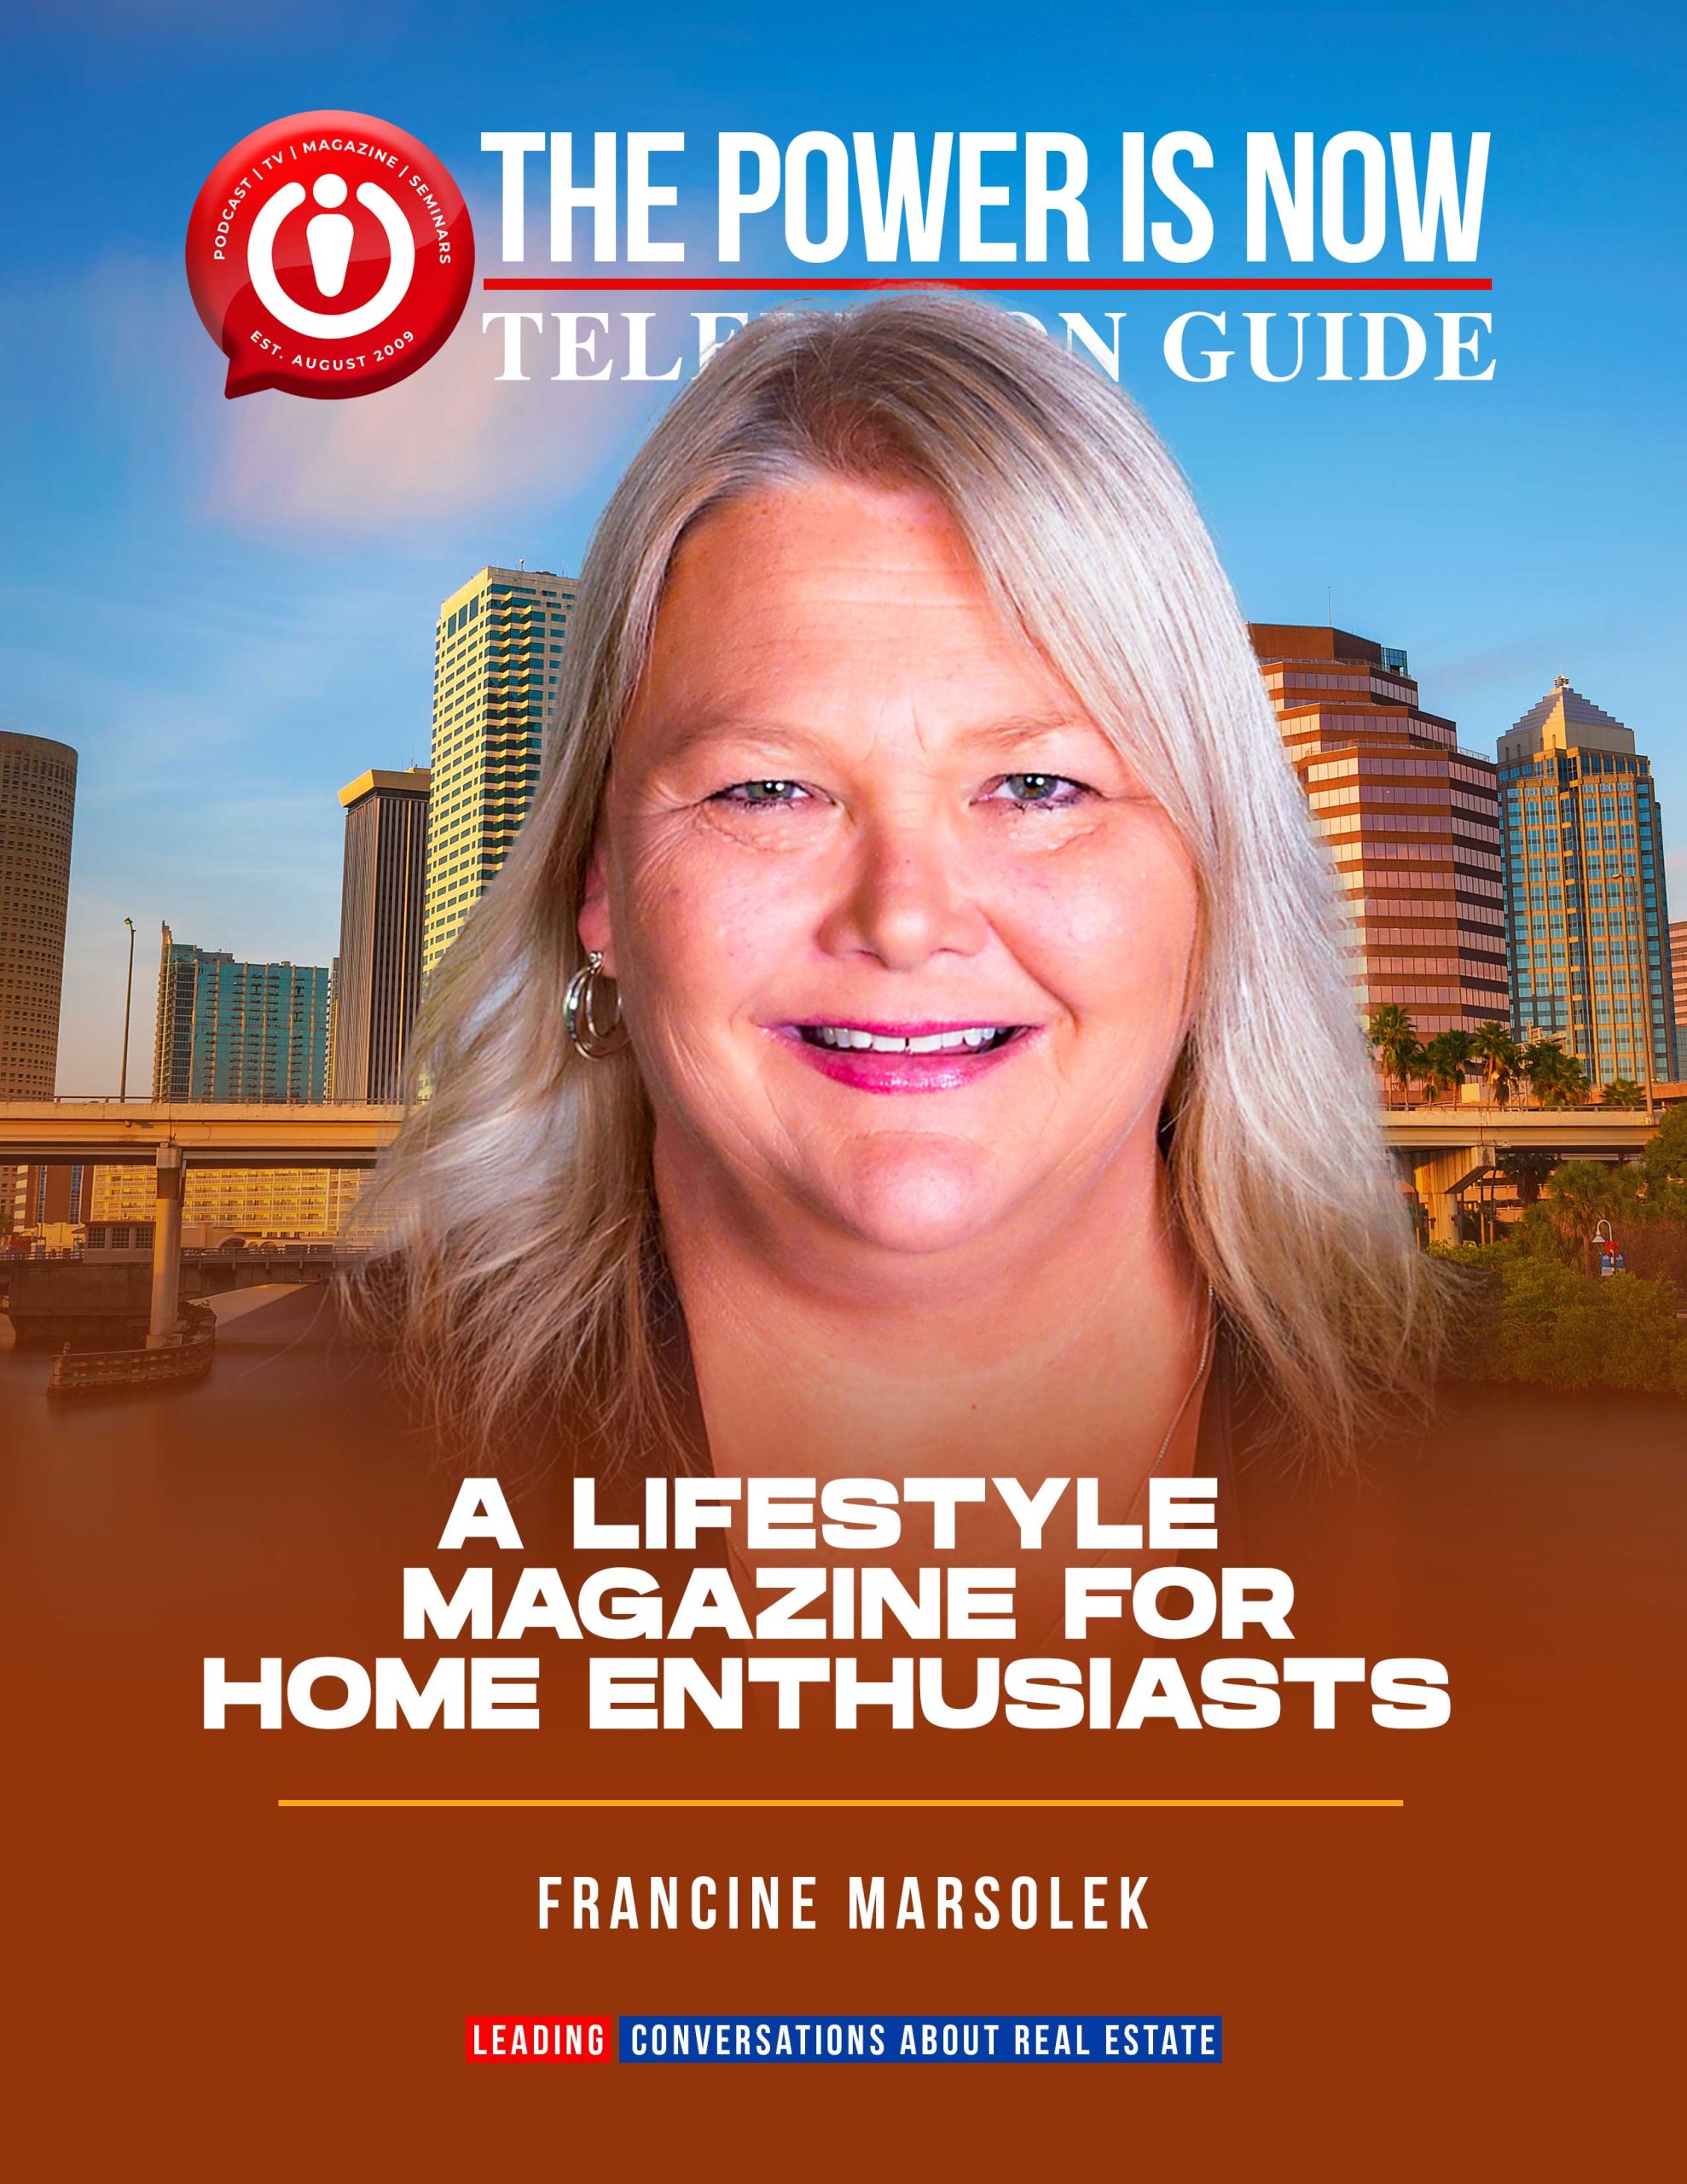 TPIN TV GUIDE MAGAZINE A Lifestyle Magazine for Home Enthusiasts